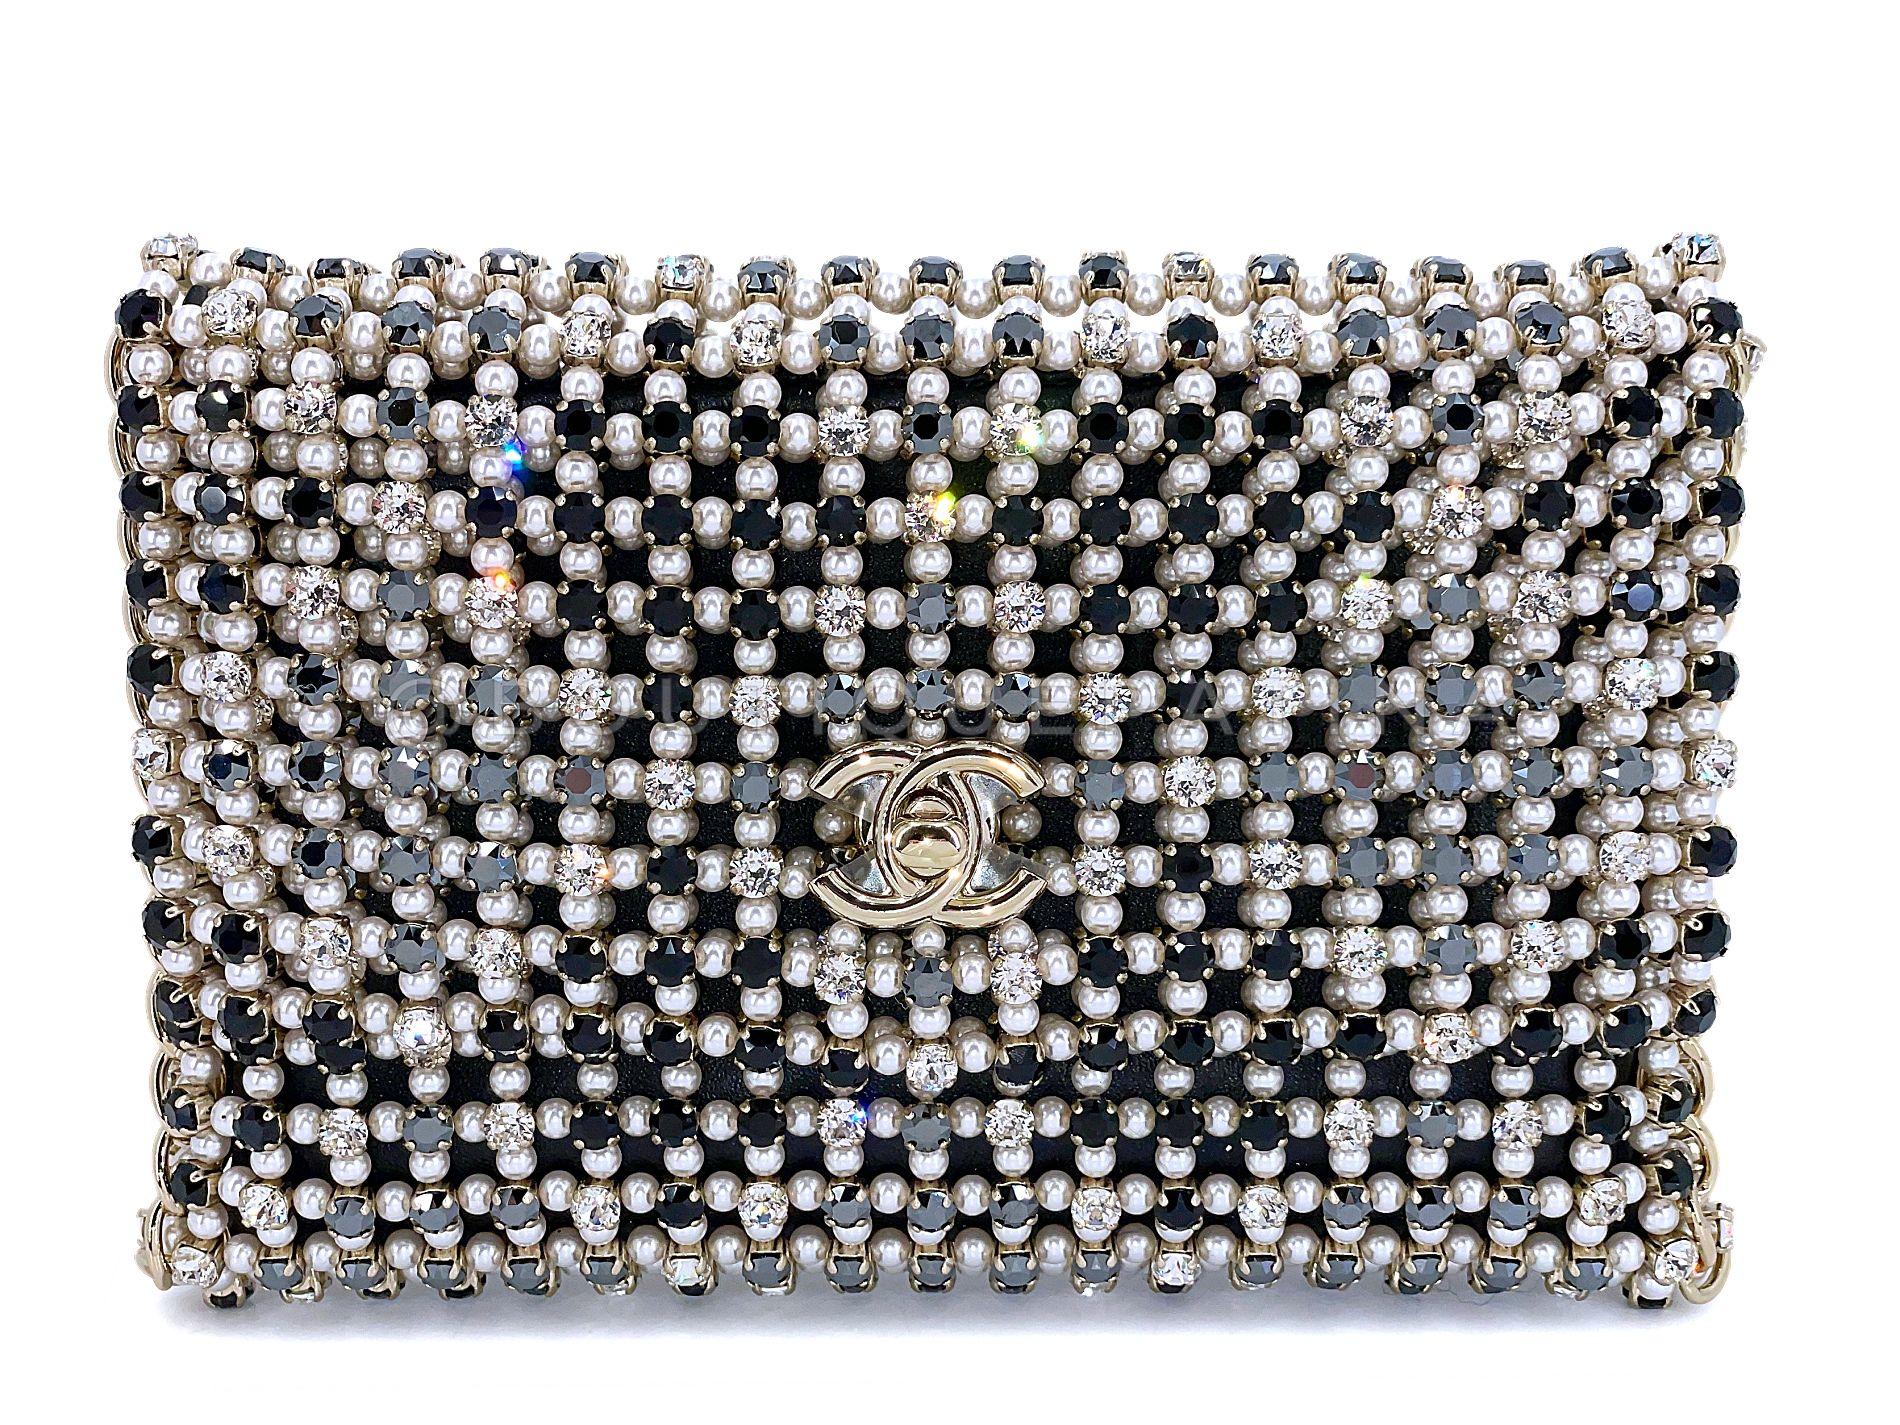 Store item: 67895
One of the most coveted bags from Virginie's recent collections is this Chanel 2021 Evening Gold Pearls Crystal Flap Bag from the 2021 Fall Winter collection. 

An all-hardware exterior made of faux pearls, large strass crystals in